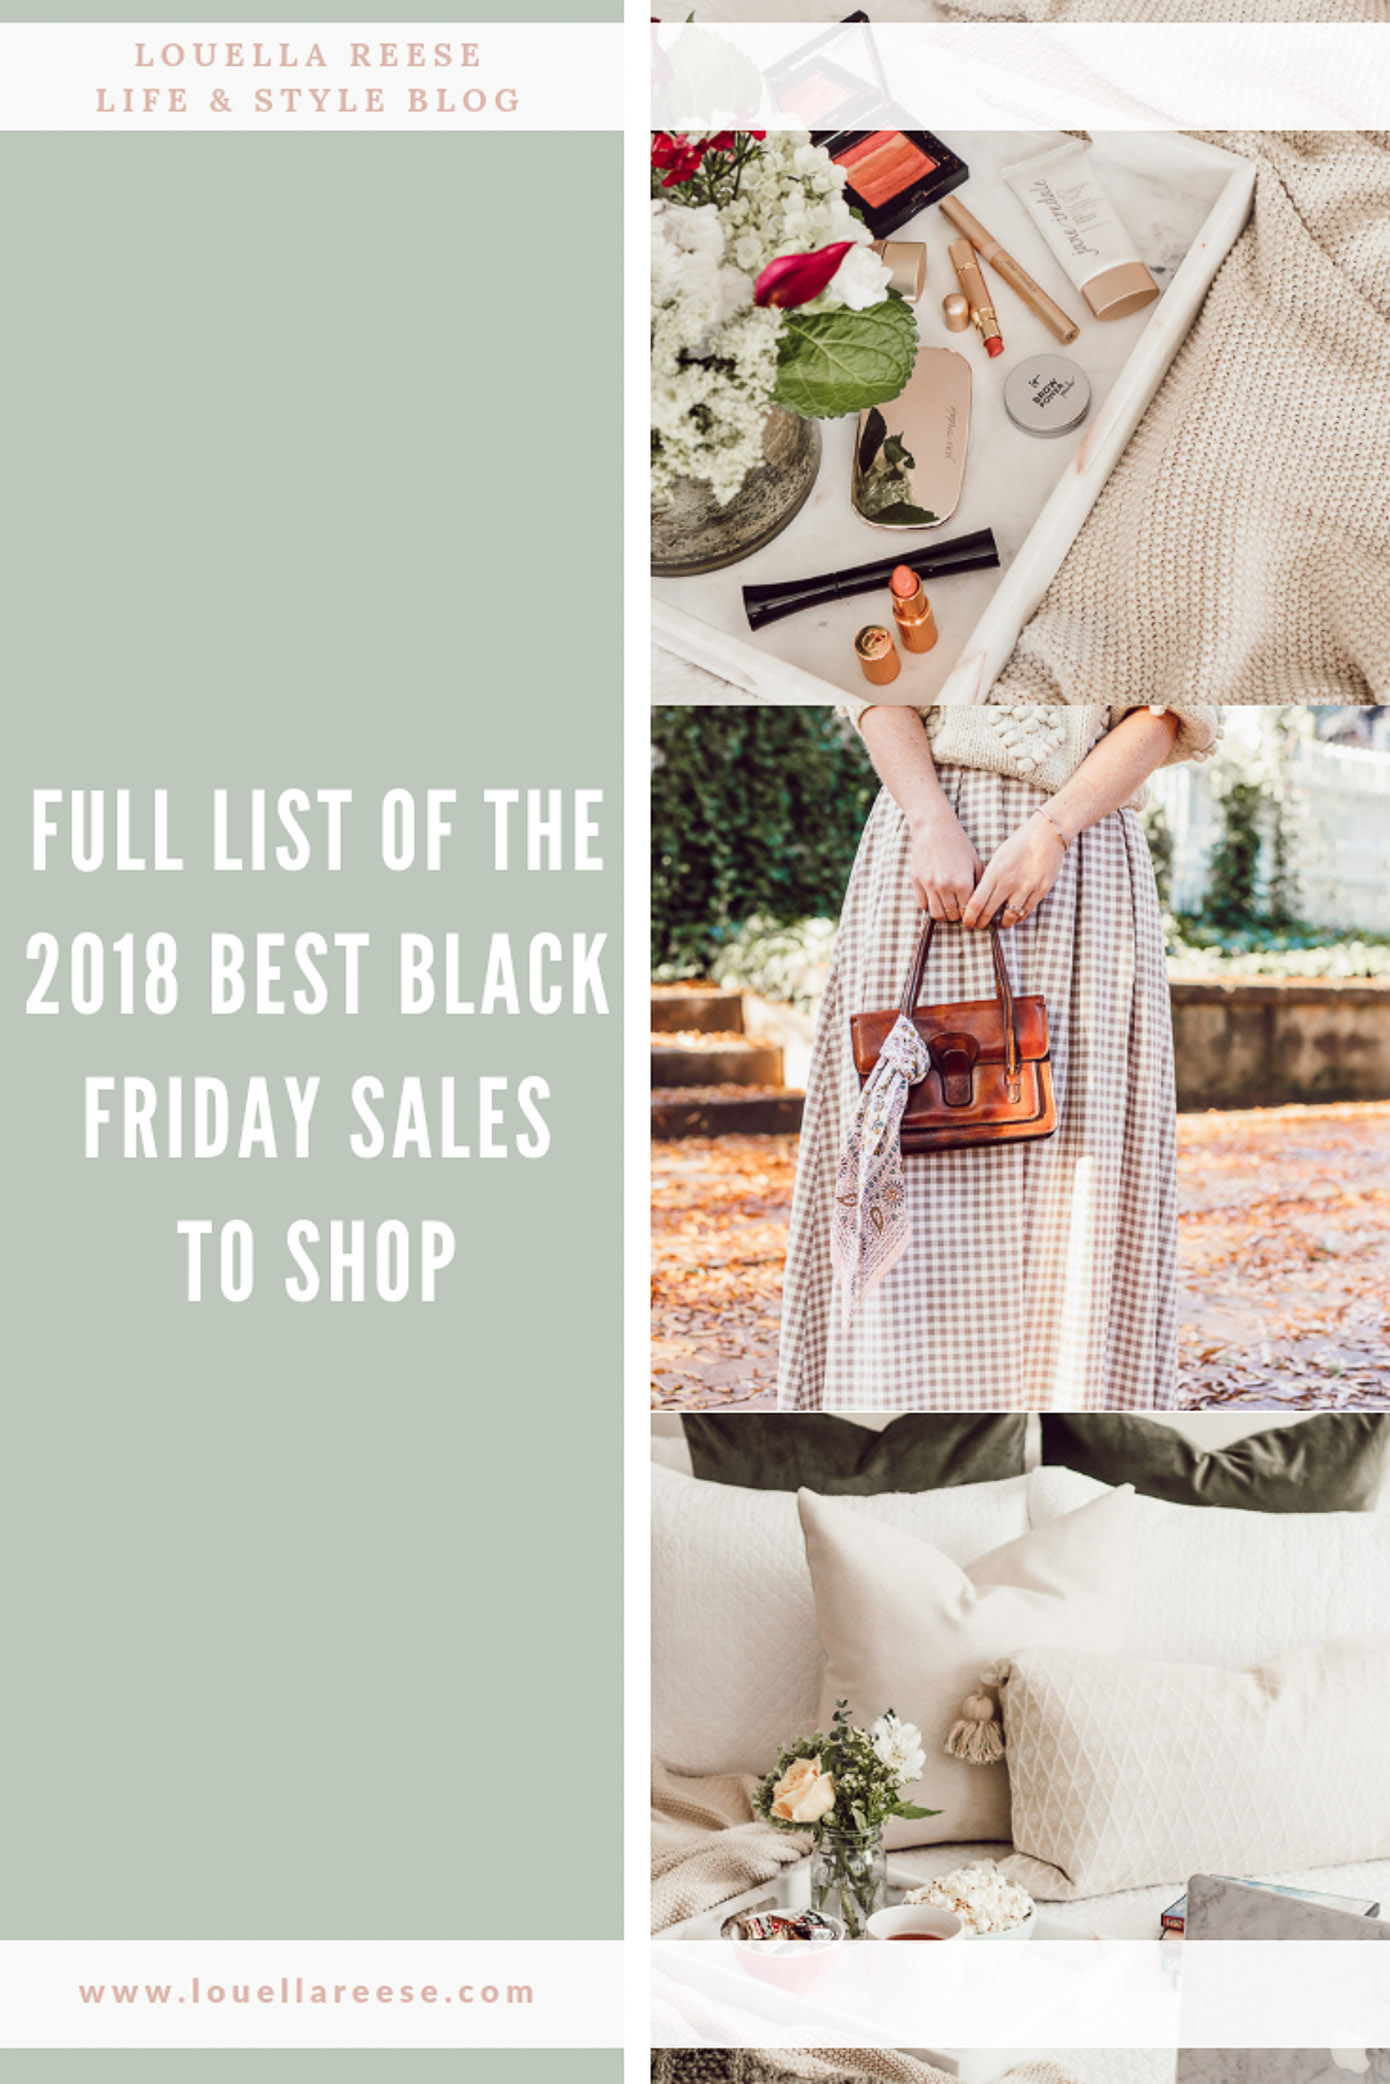 BEST 2018 Black Friday Sales featured on Louella Reese Life & Style Blog | Black Friday Sales to Shop NOW